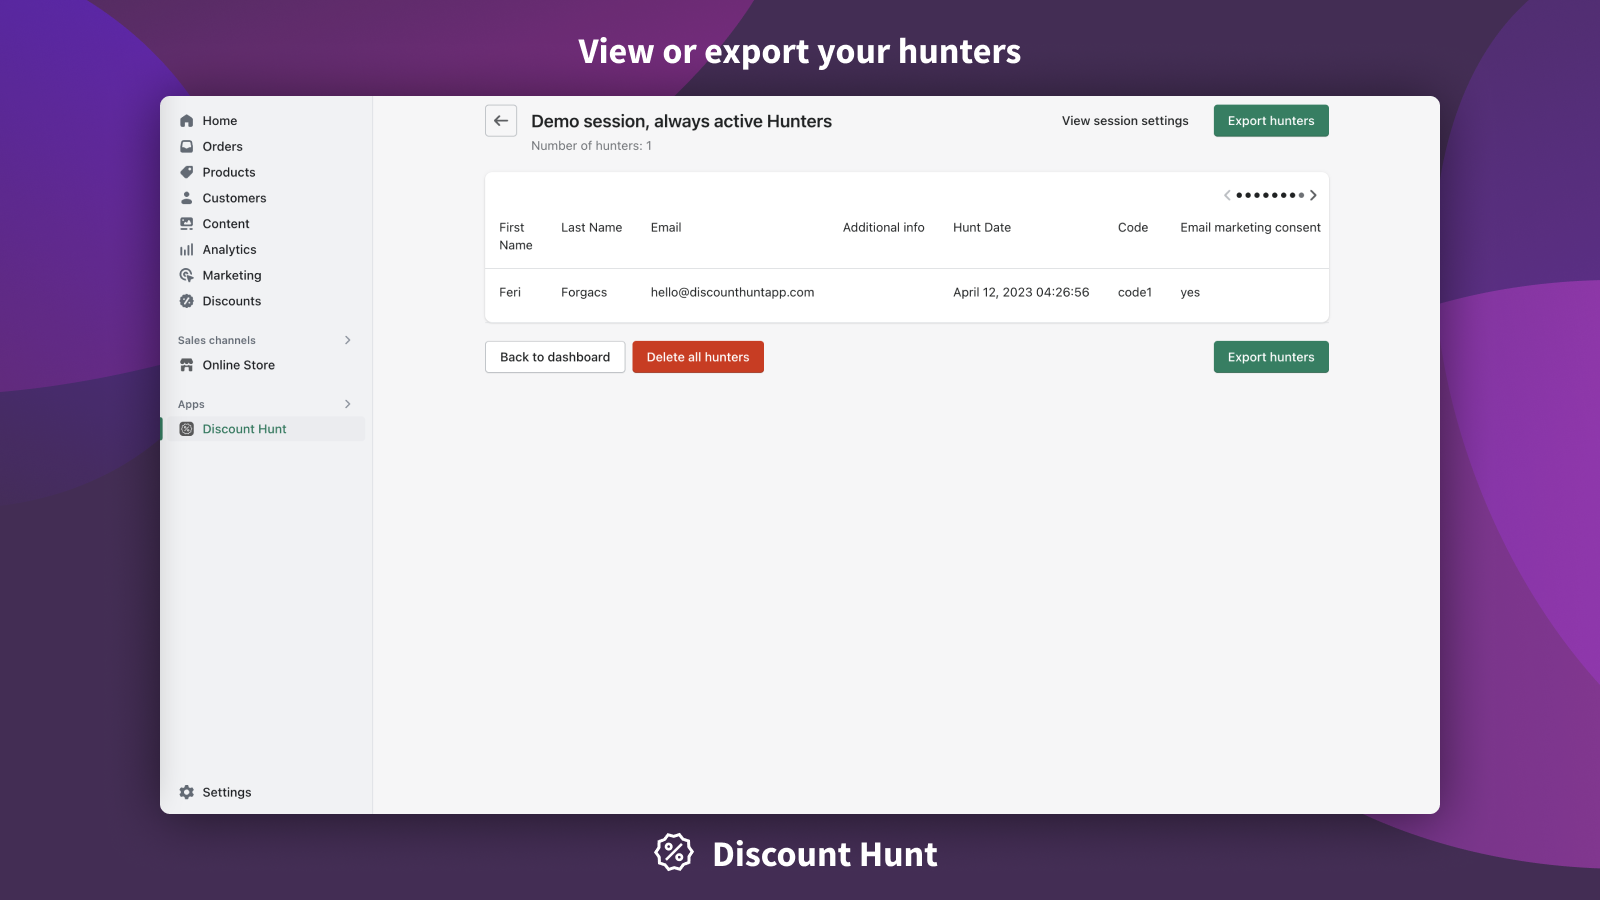 View or export your hunters